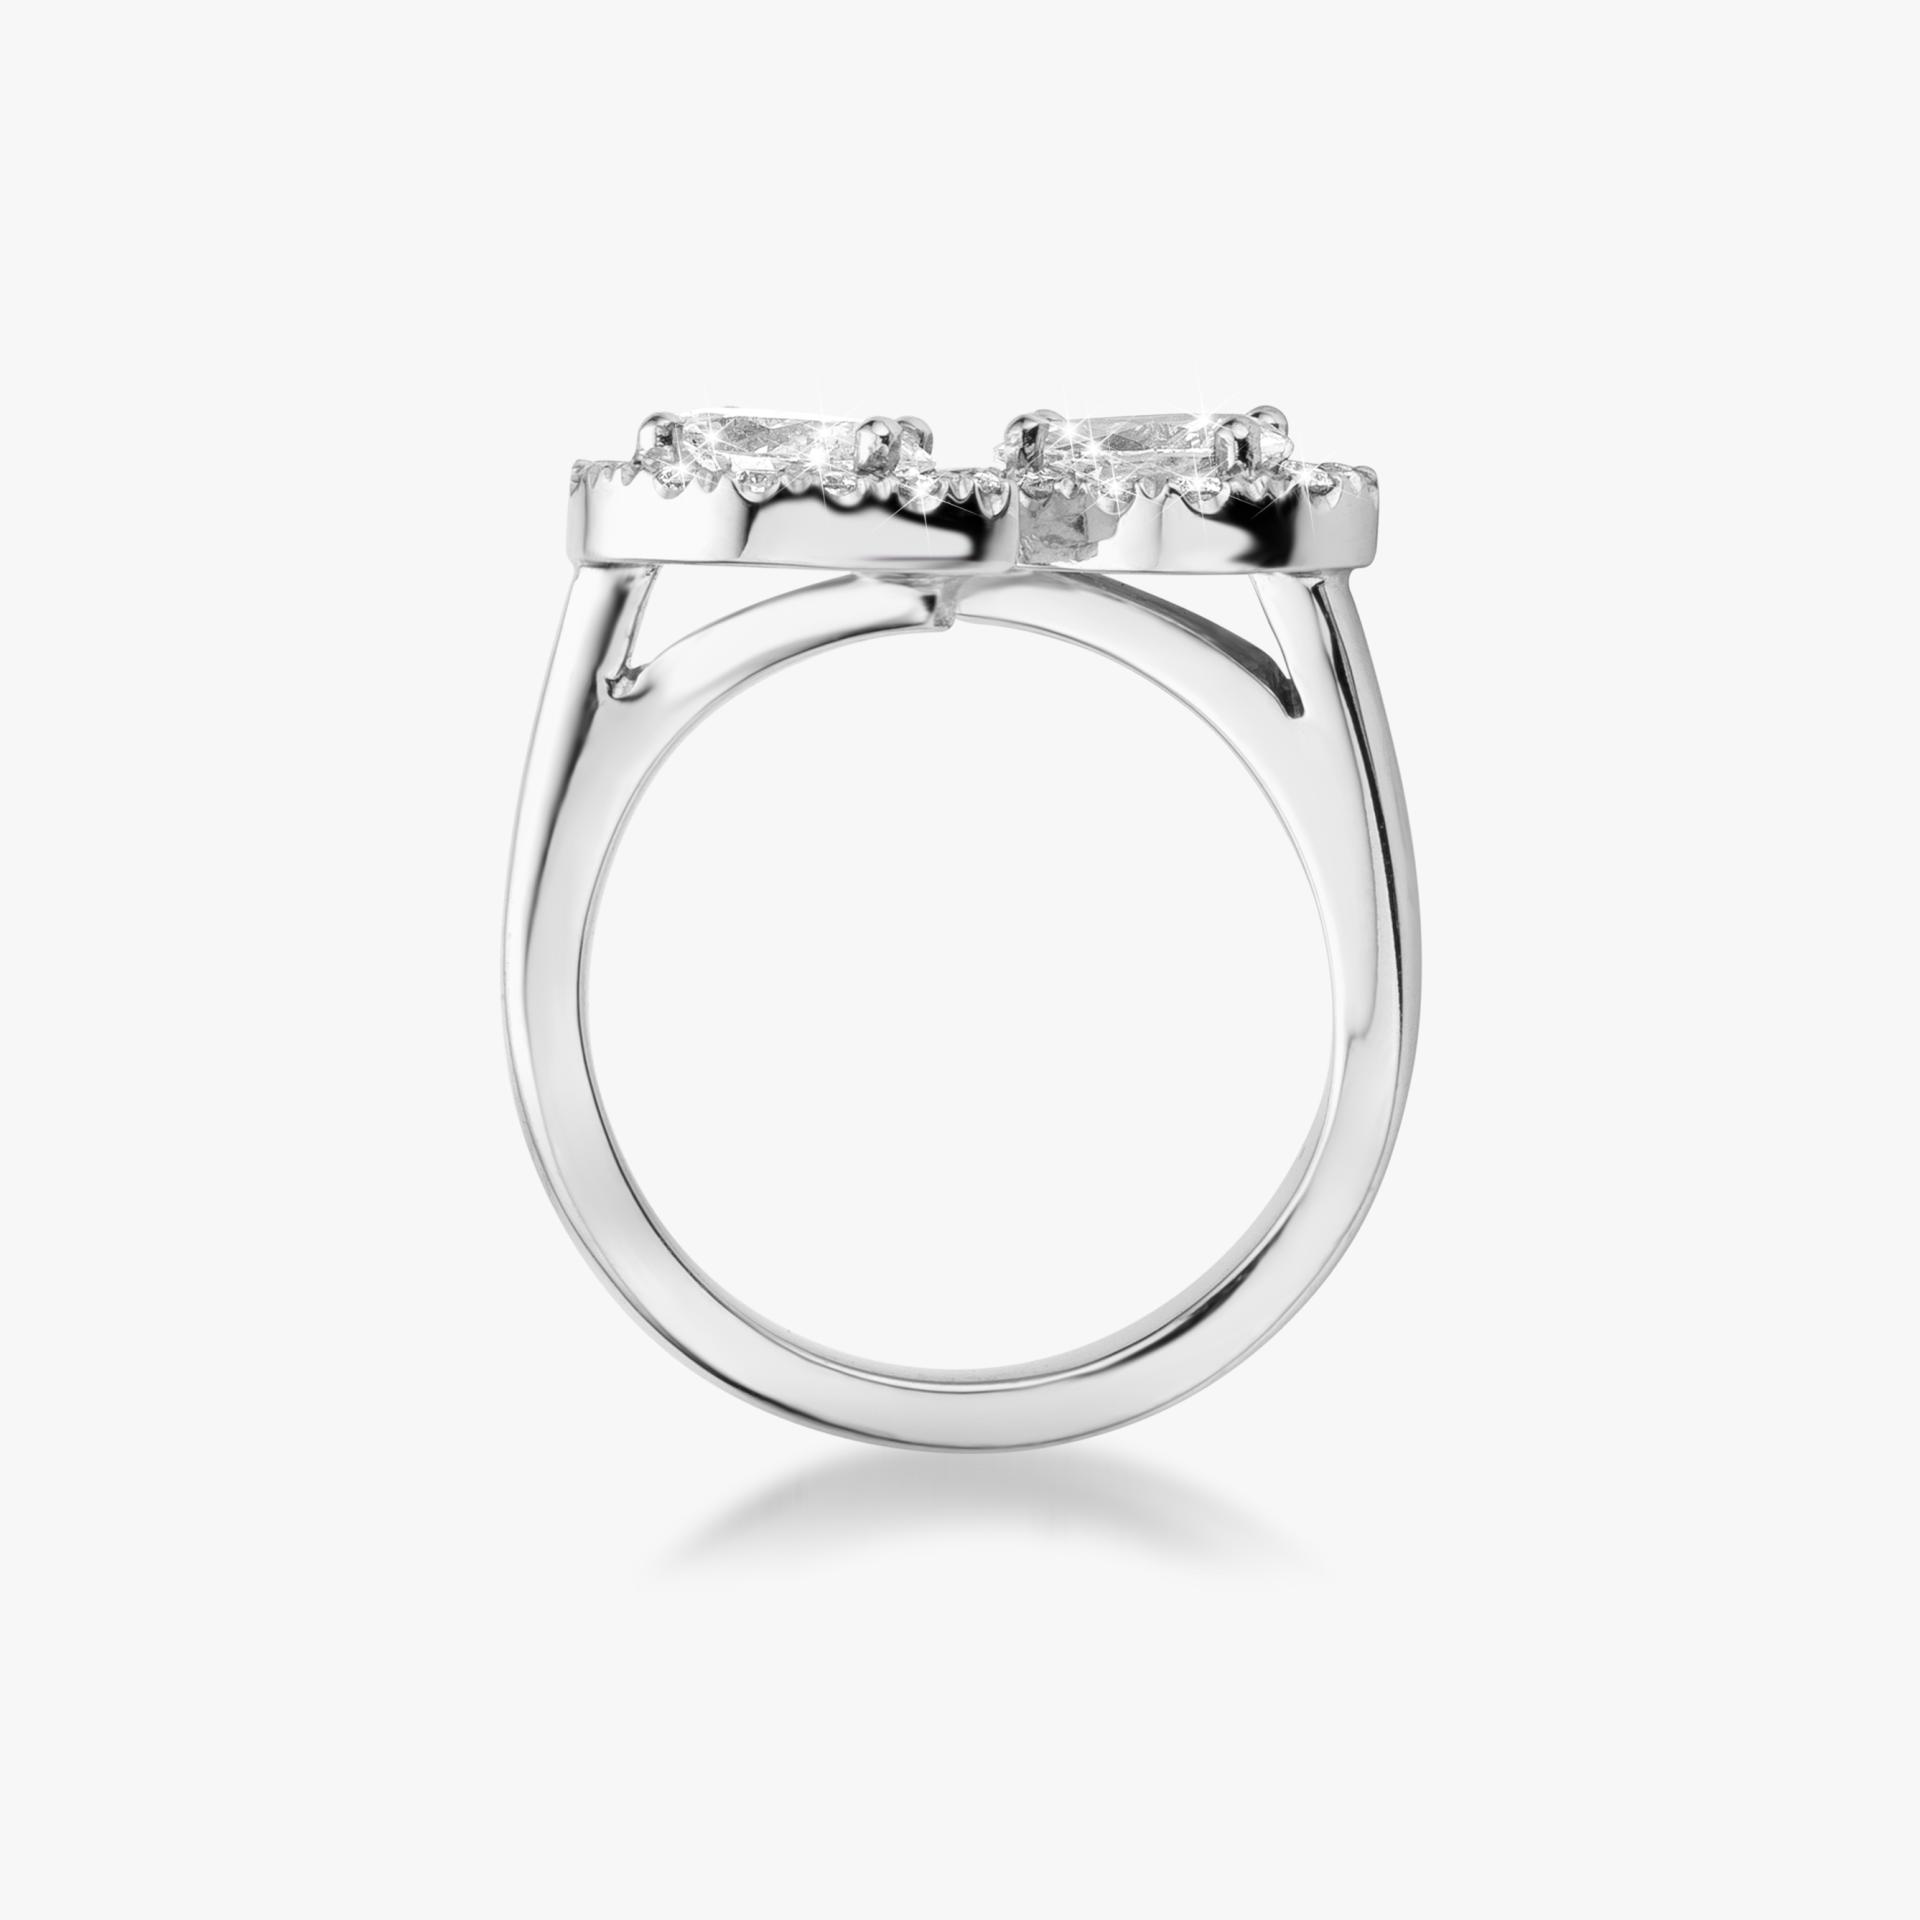 White gold ring set with pear cut and brilliant cut diamonds made by Maison De Greef